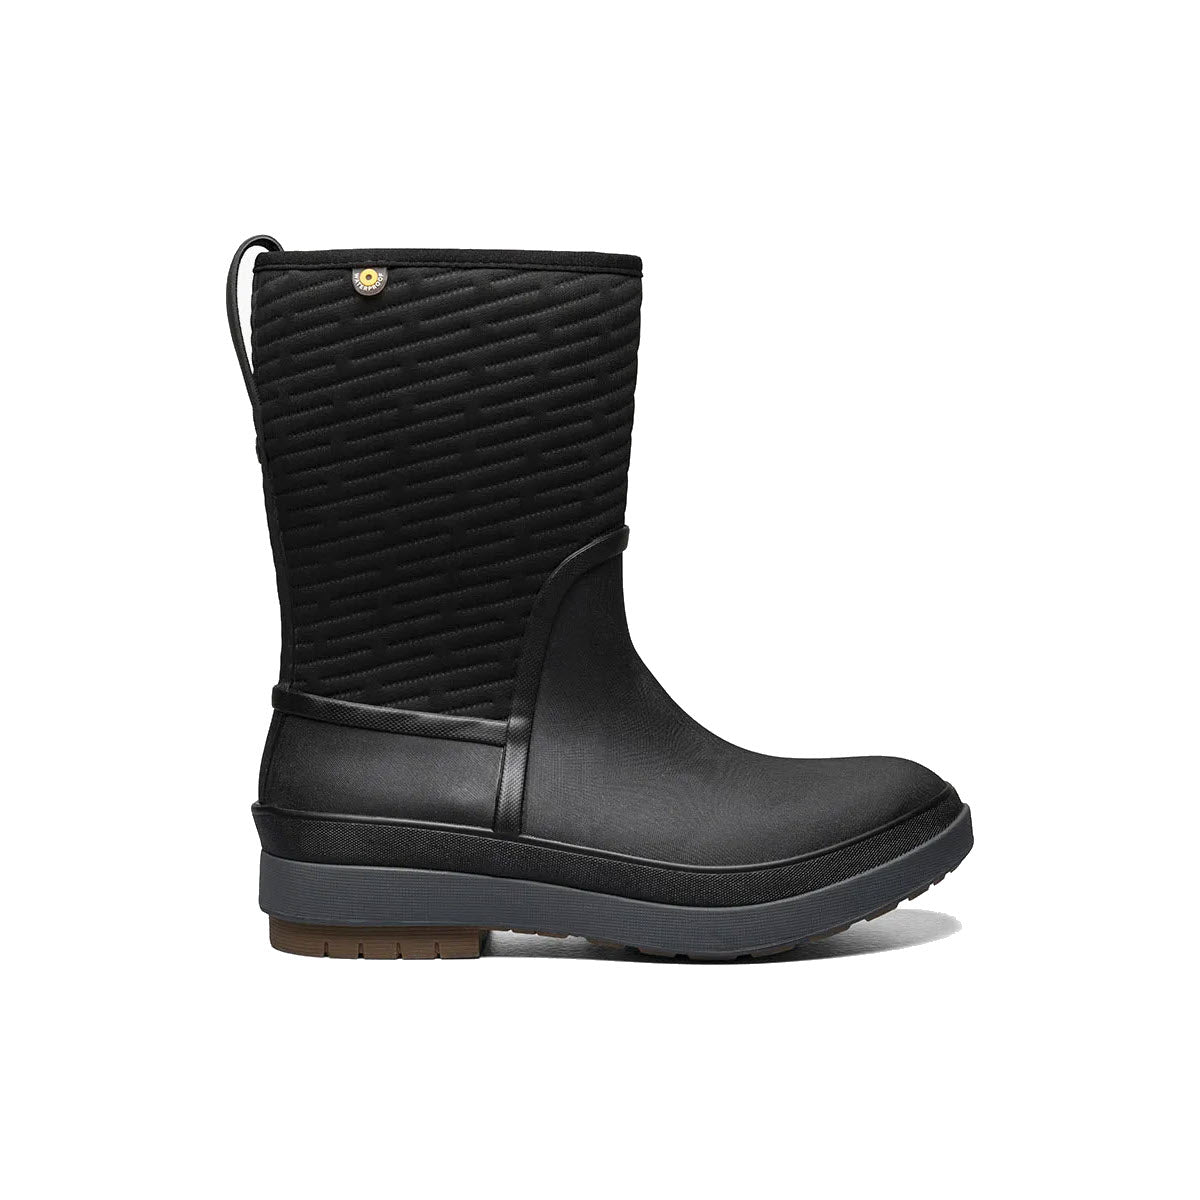 A Bogs Crandall II Mid Zip Black - Women's snow boots with a low heel and a round toe, displayed against a white background.